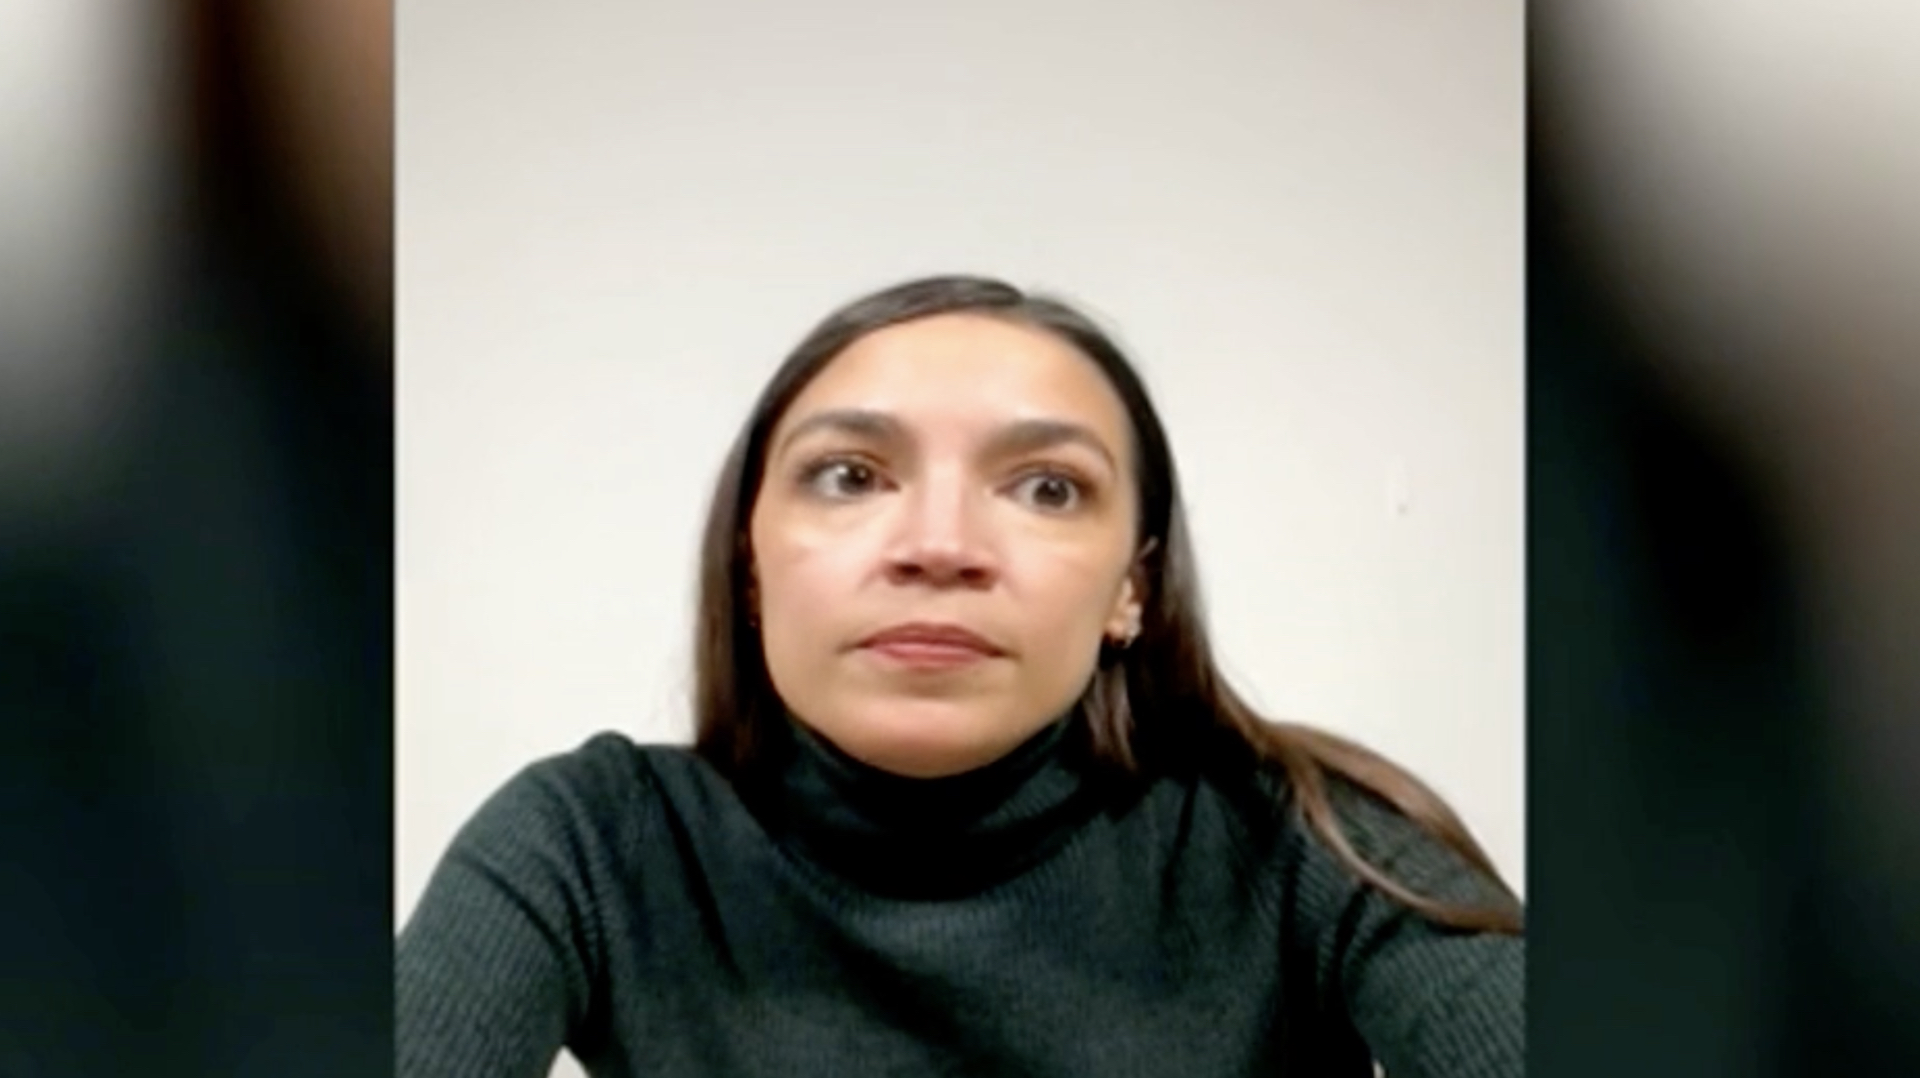 Alexandria Ocasio-Cortez: “I was raped at twenty.  Fortunately, I can choose whether or not to have an abortion.”